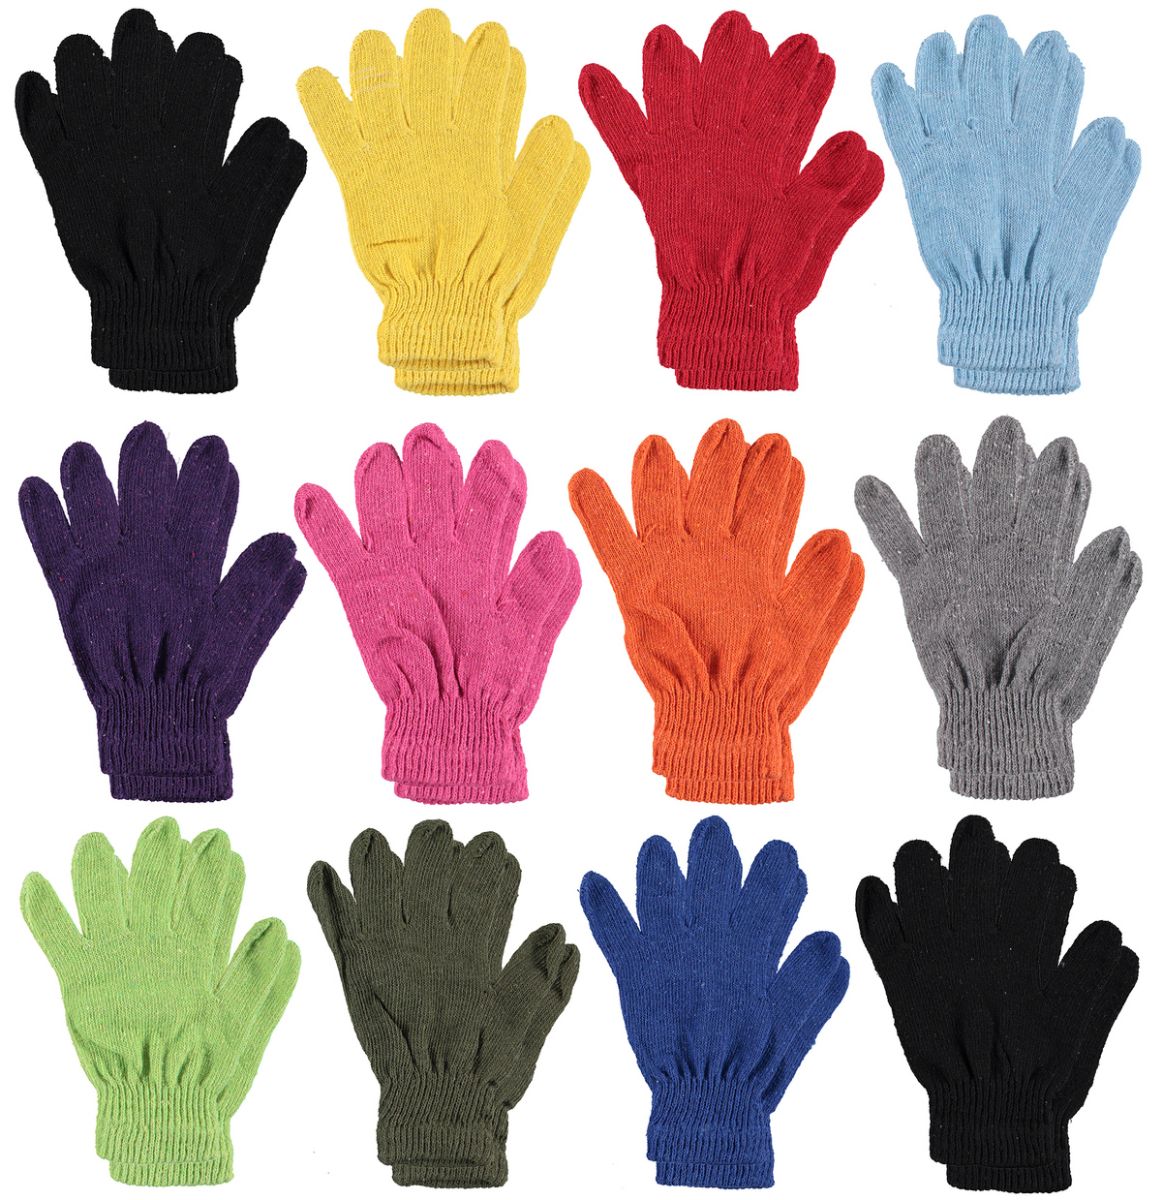 72 Wholesale Yacht & Smith Women's Warm And Stretchy Winter Magic Gloves Bulk Pack Bright Colors